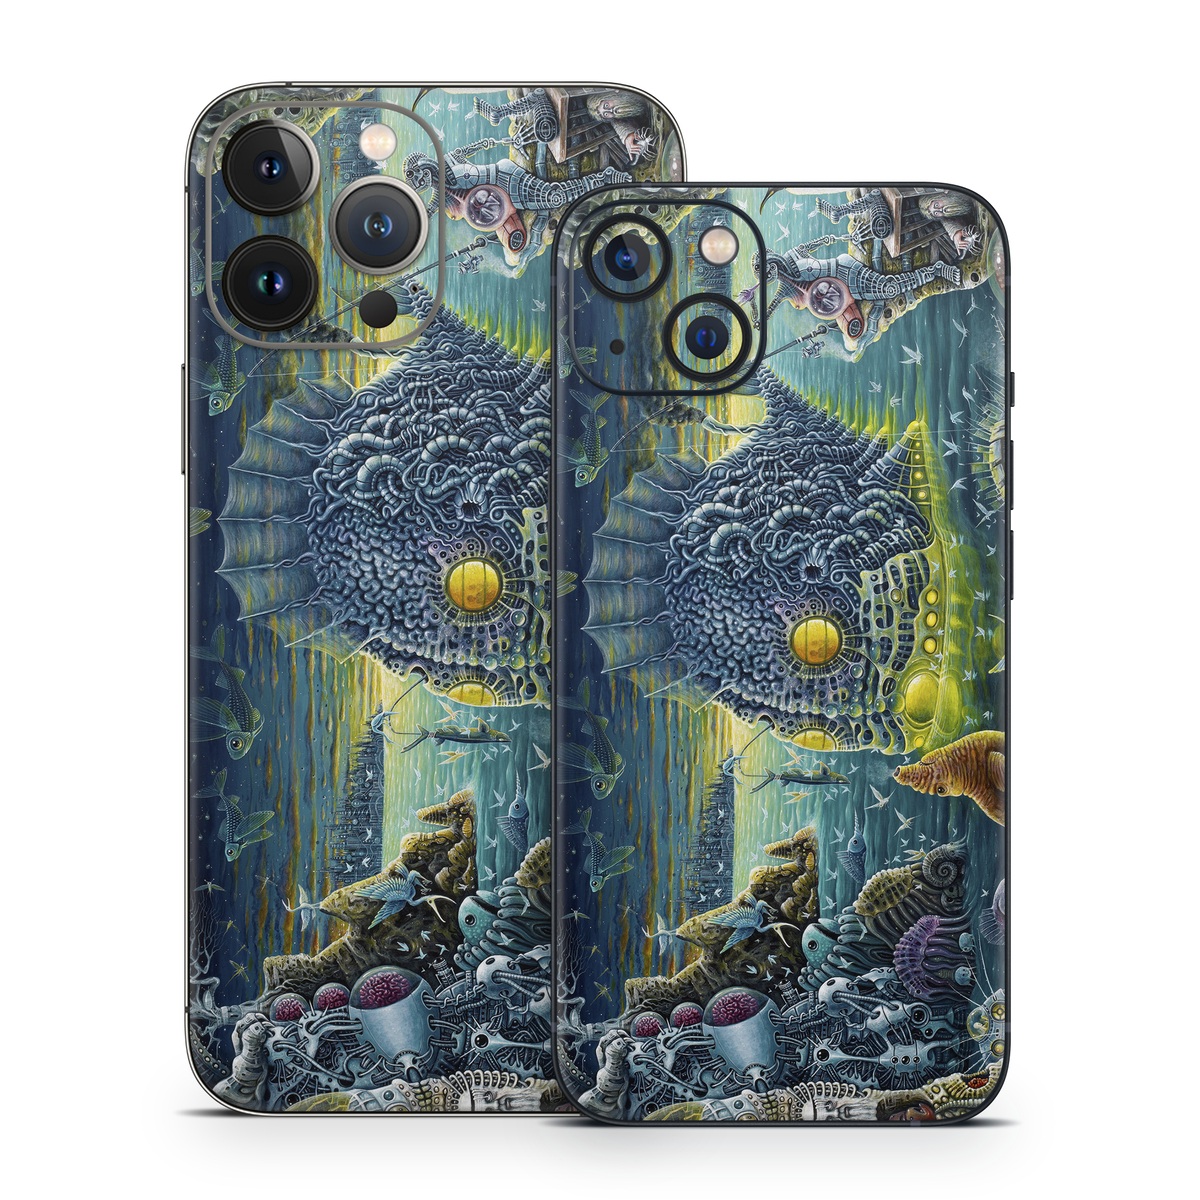 iPhone 13 Series Skin design of Organism, Water, Illustration, Art, Painting, Cg artwork, Fiction, Fictional character, Marine biology, Mythology, with black, gray, blue, green colors